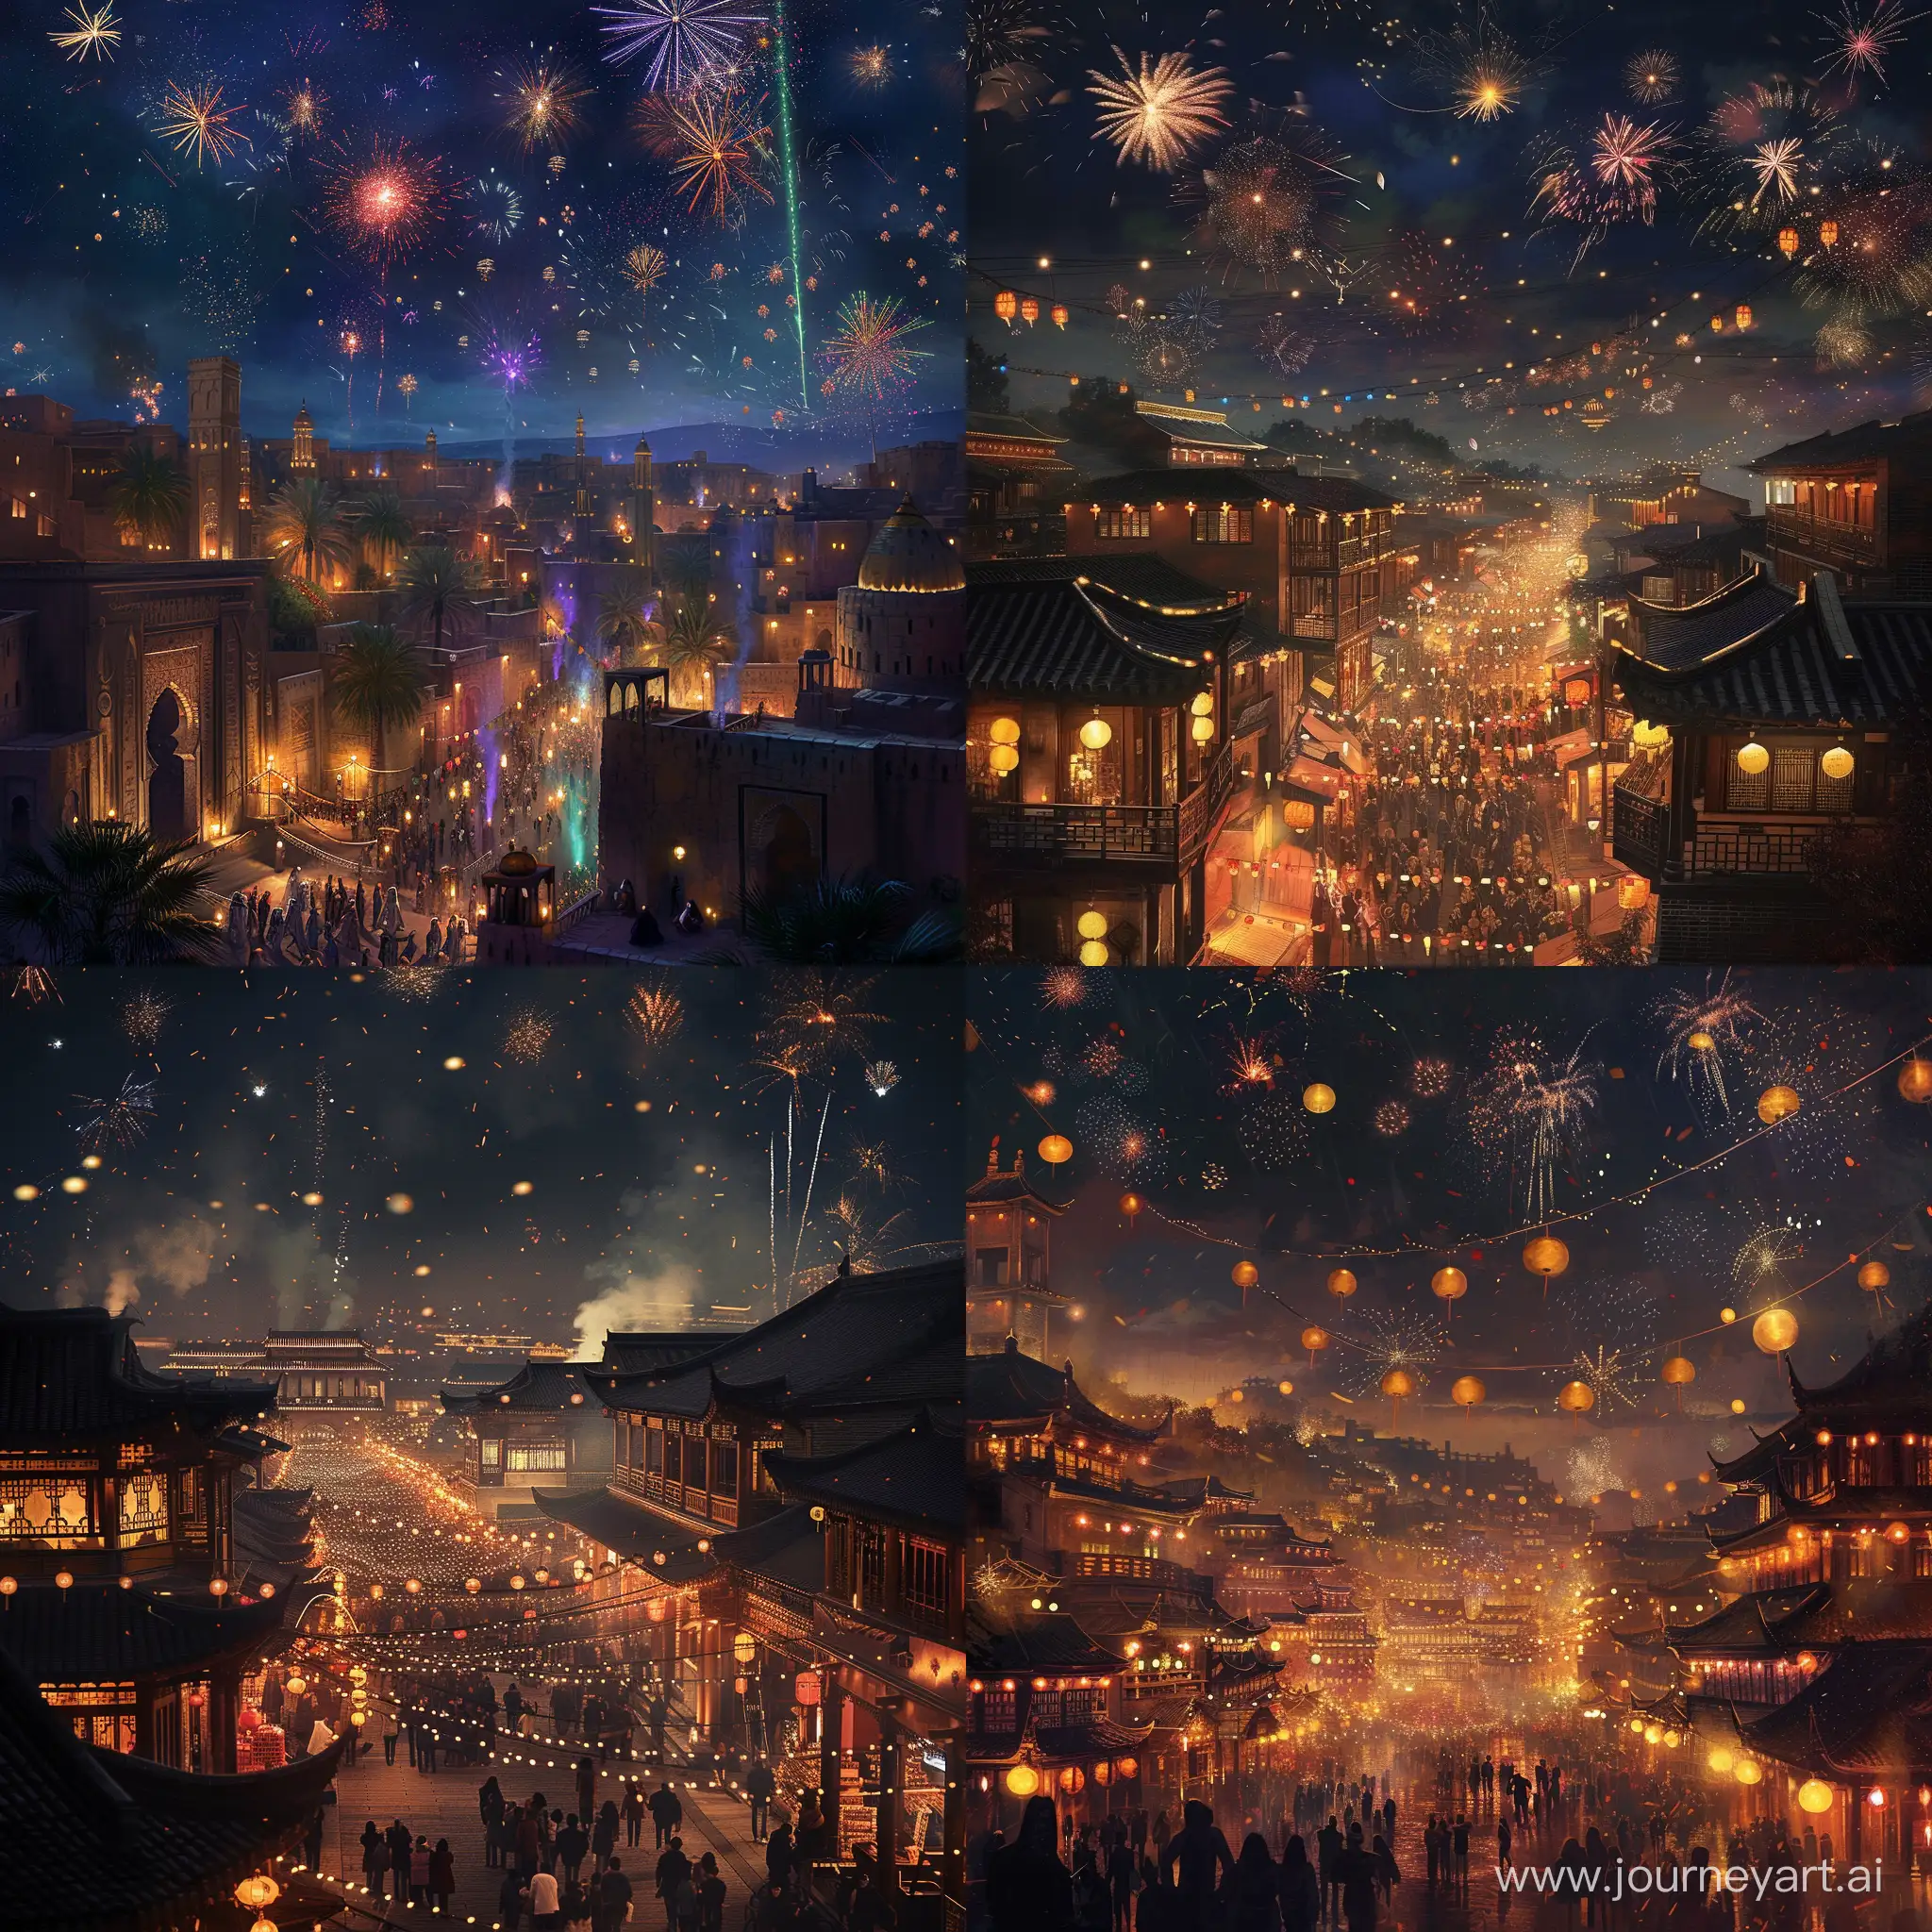 Vibrant-New-Year-Celebration-in-Ancient-City-Lights